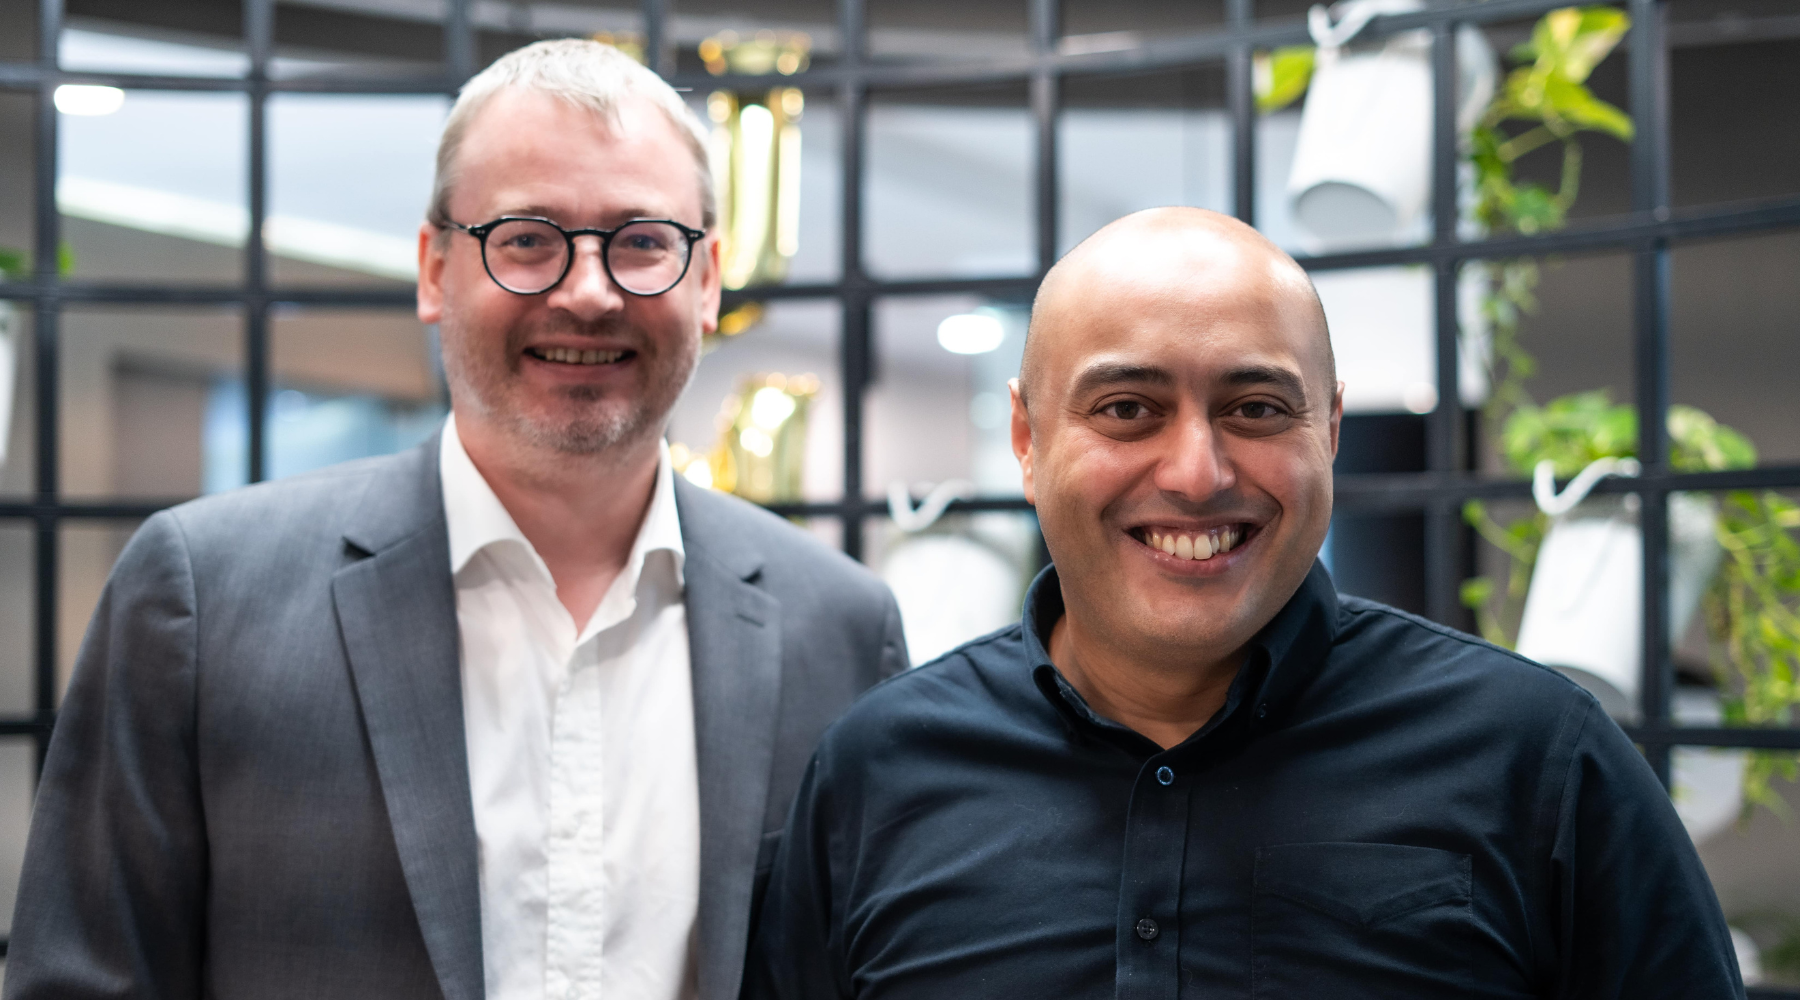 UM MENAT Strengthens Leadership Team with Two Key Appointments